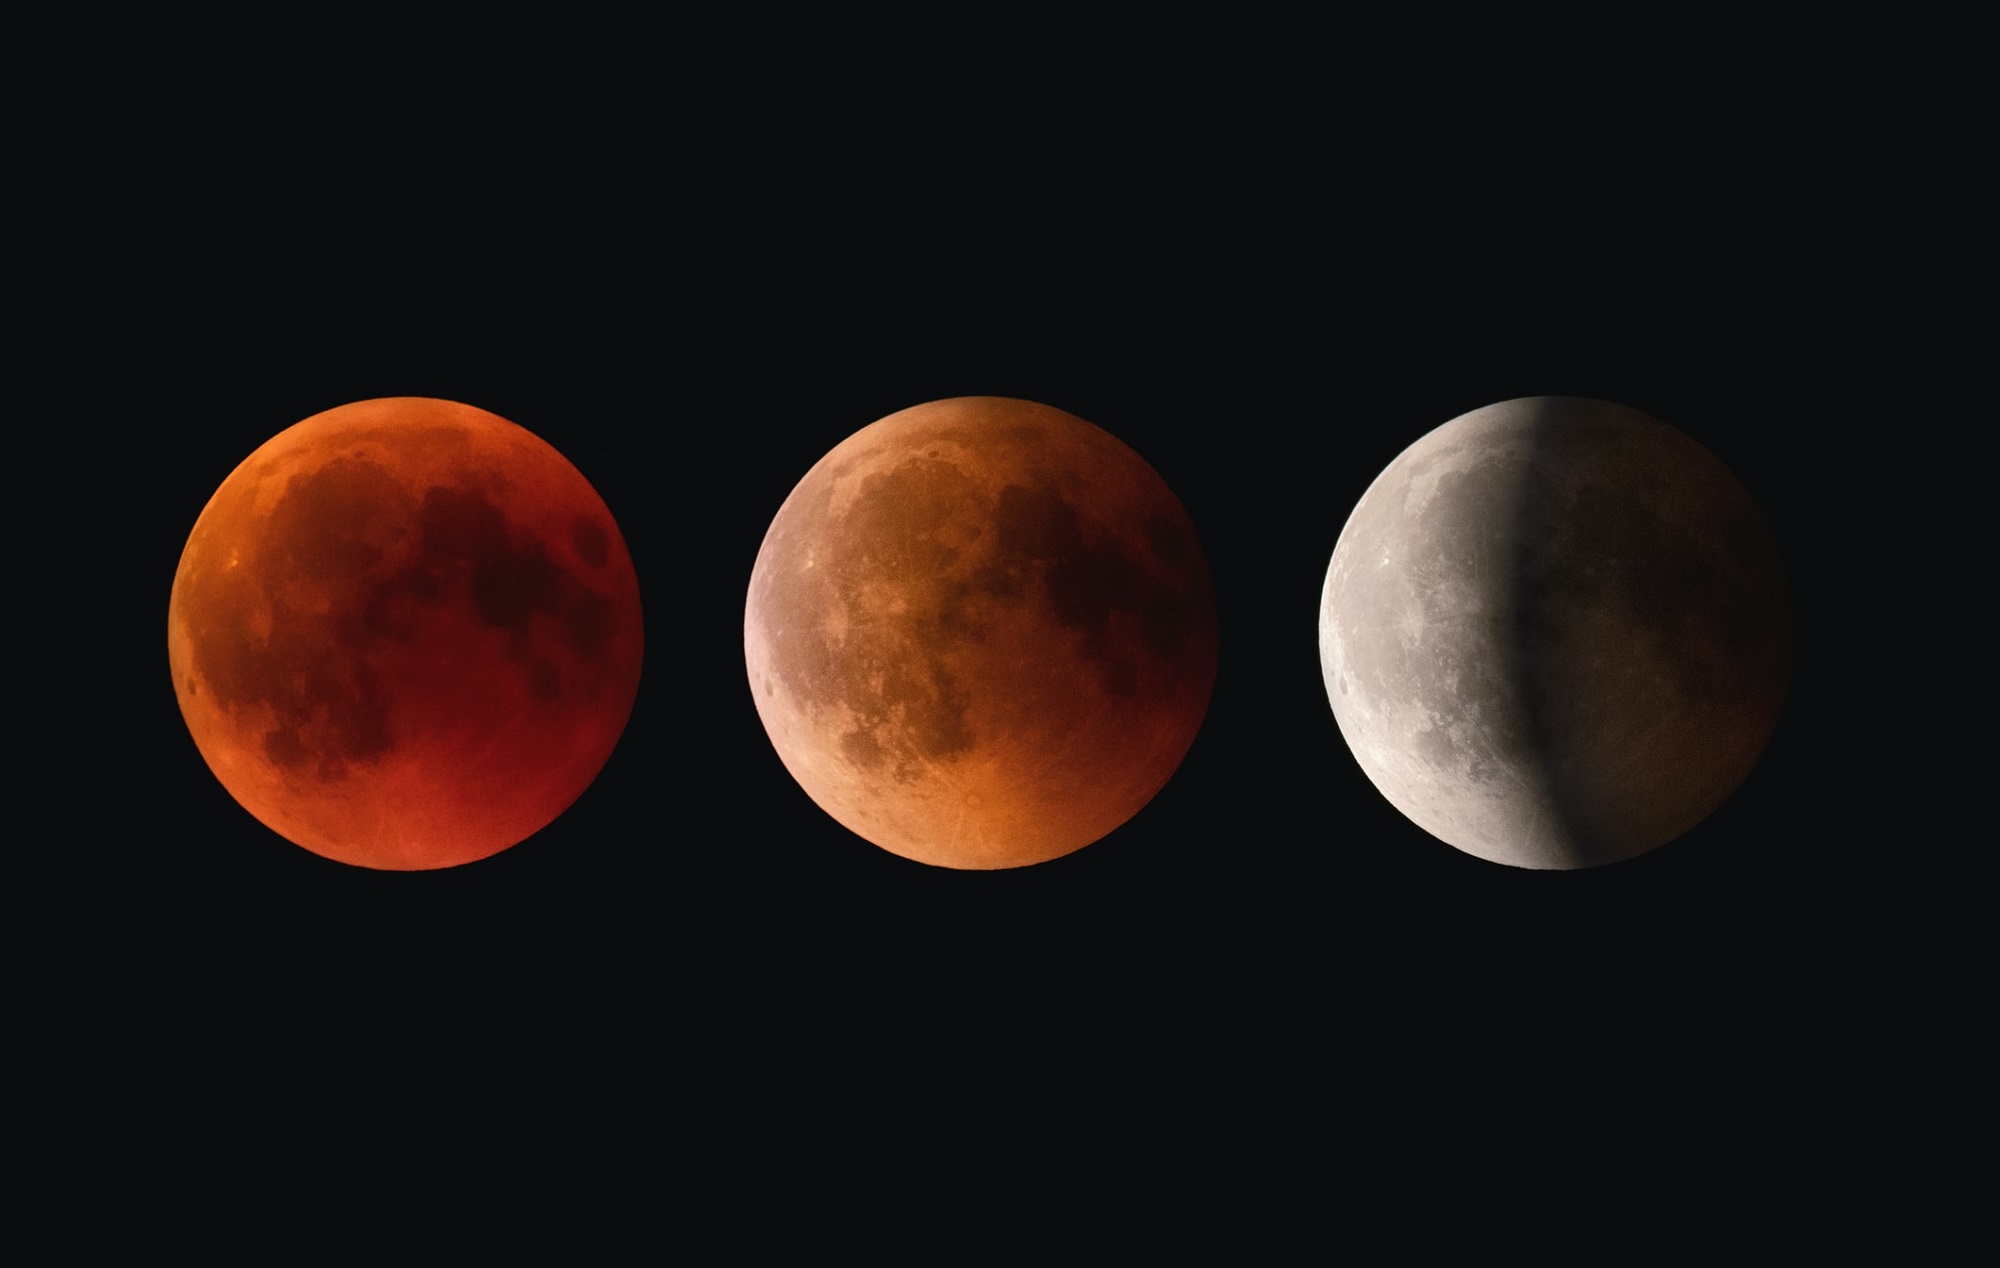 Don’t miss this weekend’s total lunar eclipse